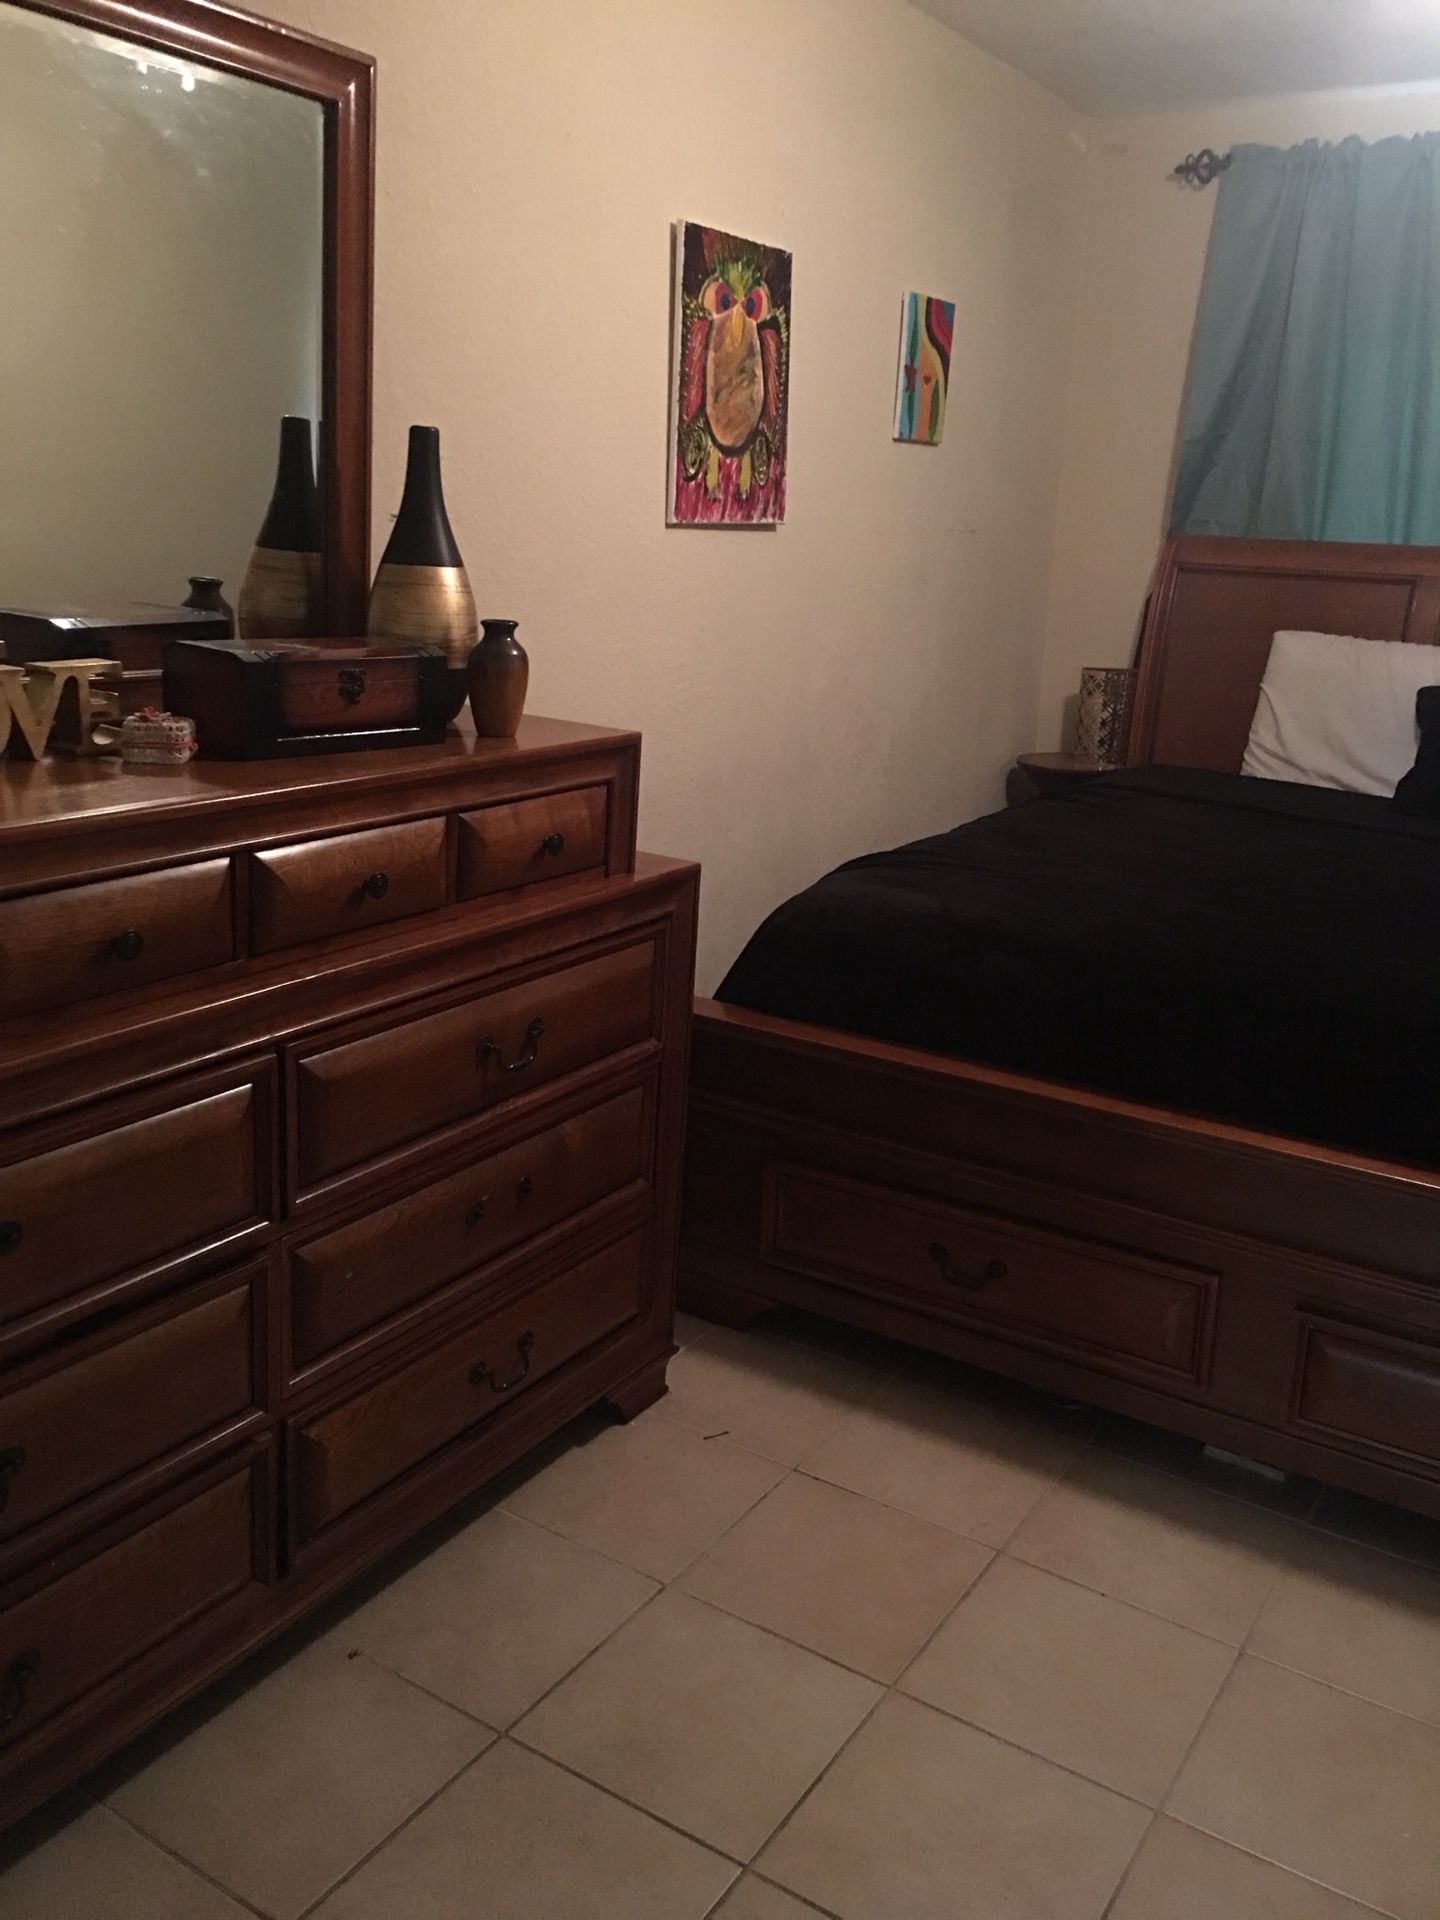 King bedroom set including mattress. Good conditions.